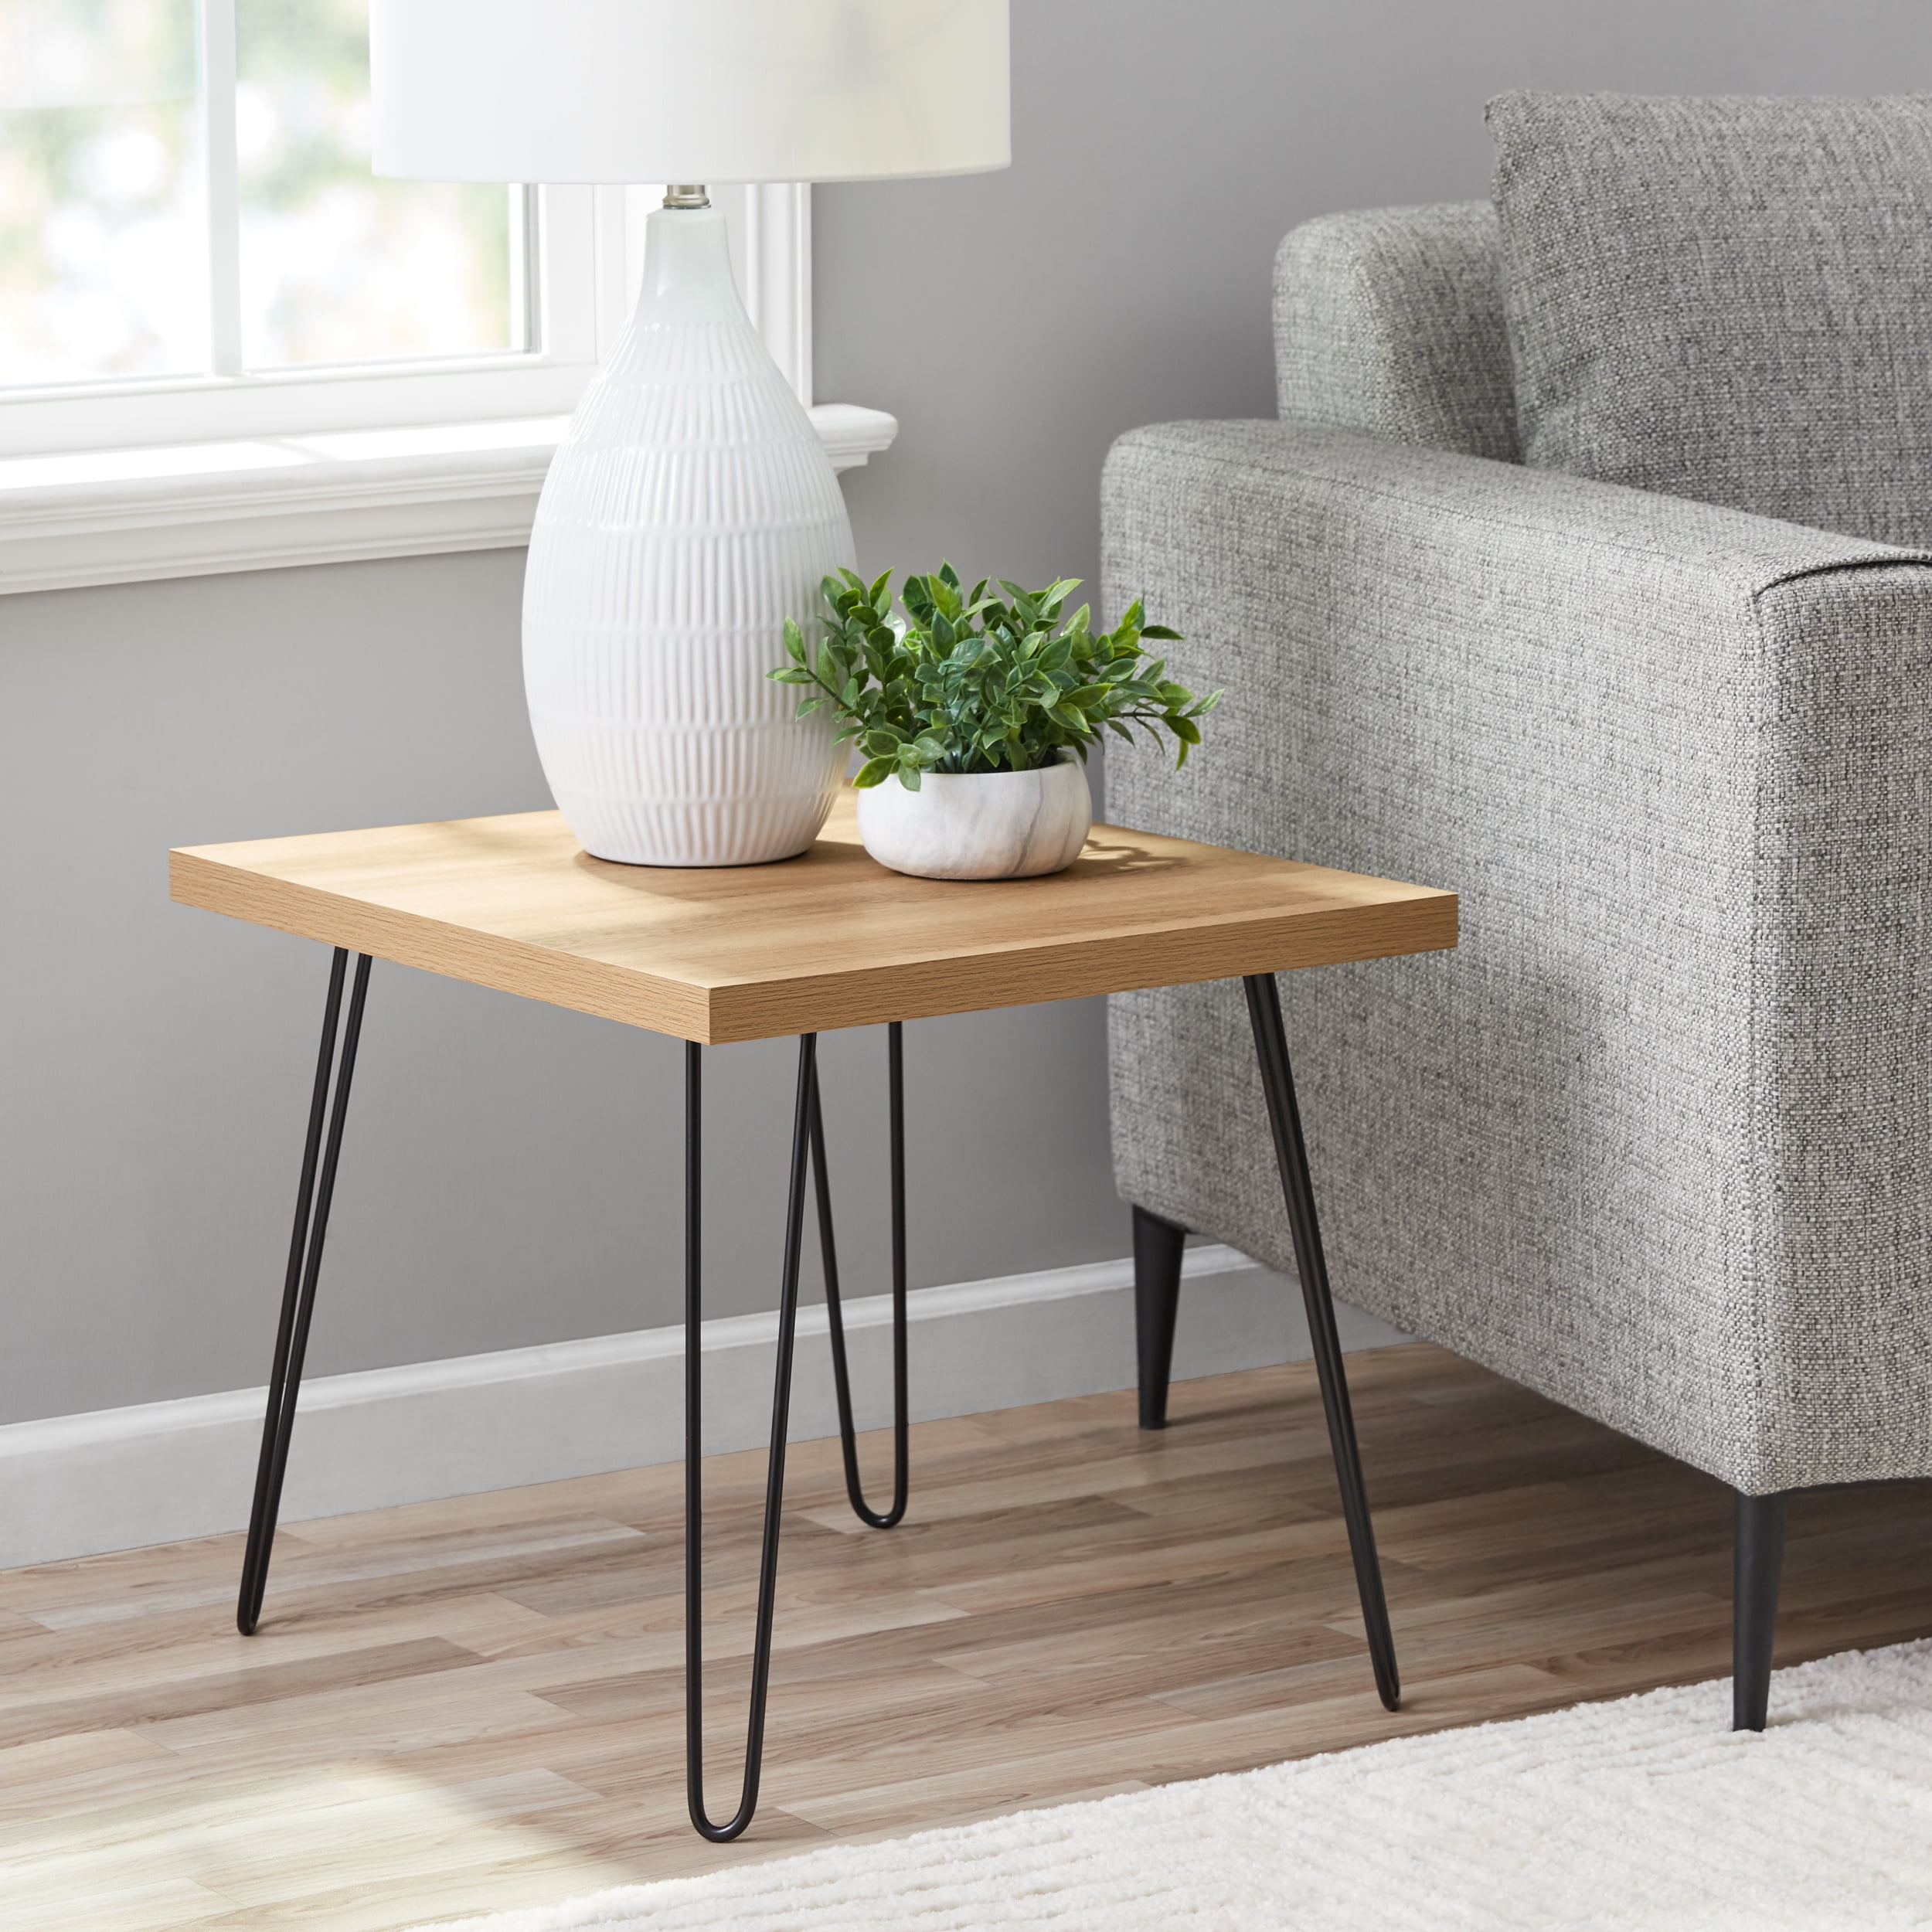 Mainstays Hairpin Square Side Table (Oak) $31 + Free Shipping w/ Walmart+ or on $35+